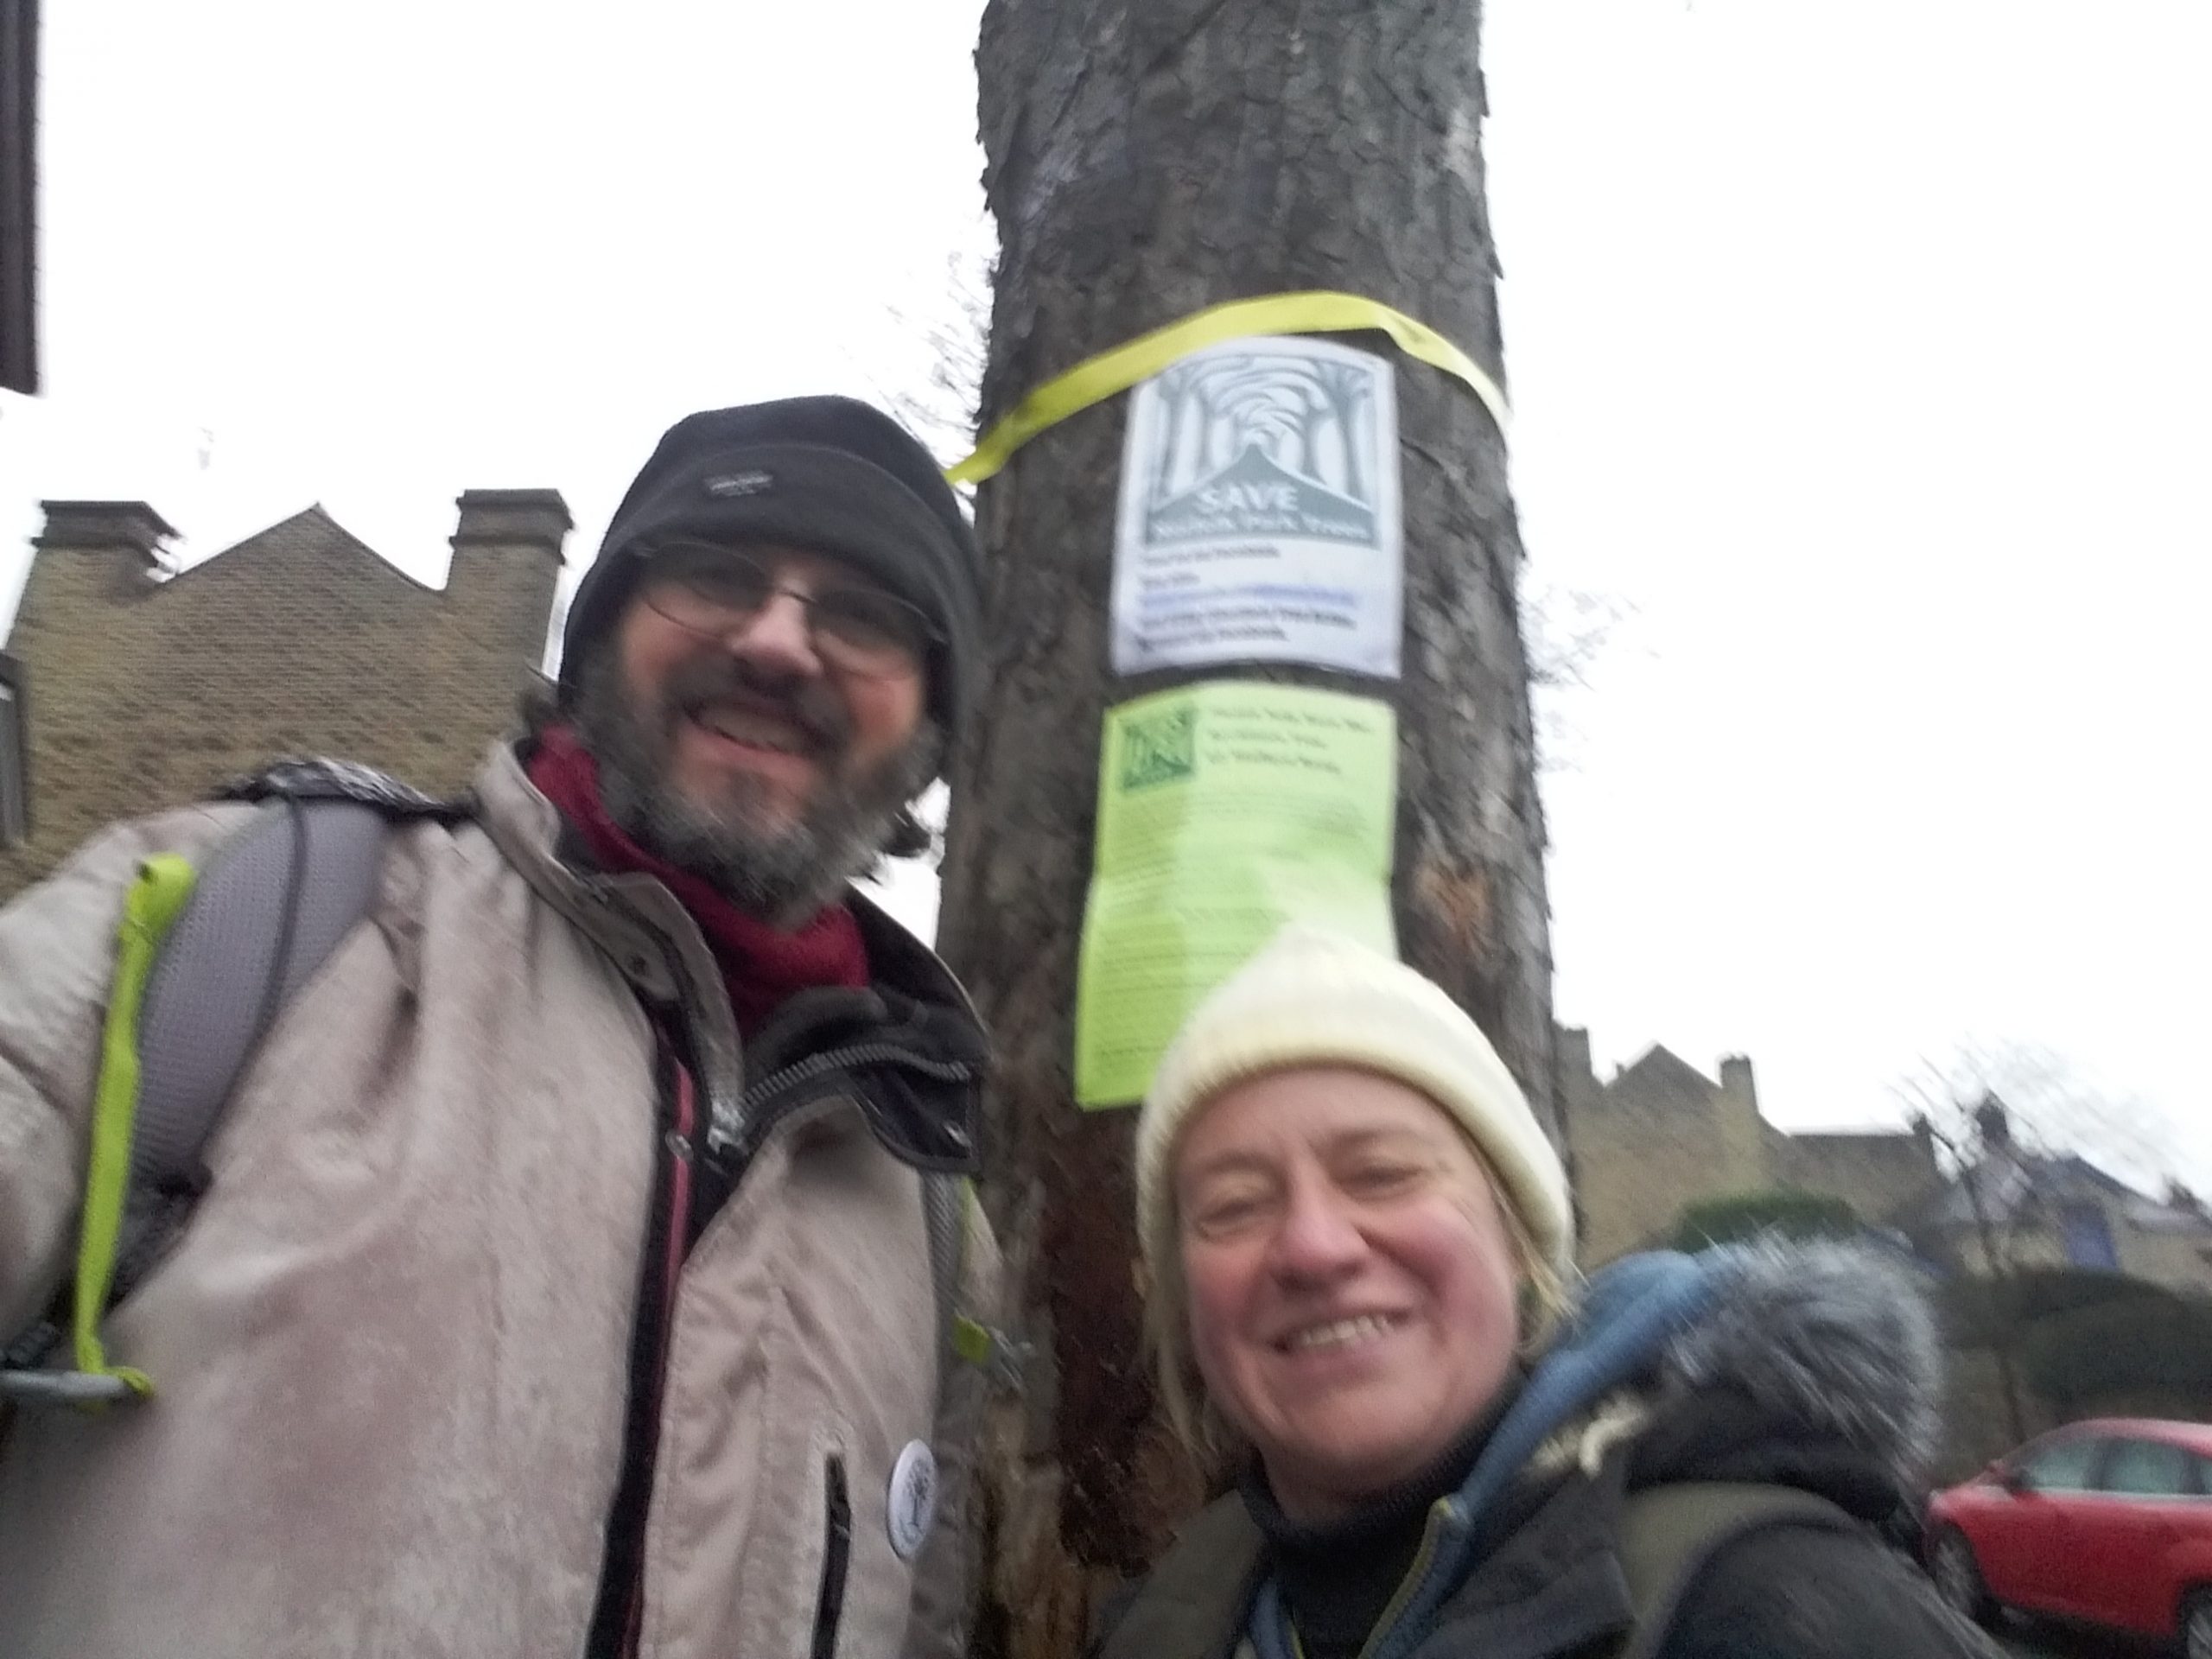 Graham Wroe and Natalie Bennett tree campaigning in Norfolk Park